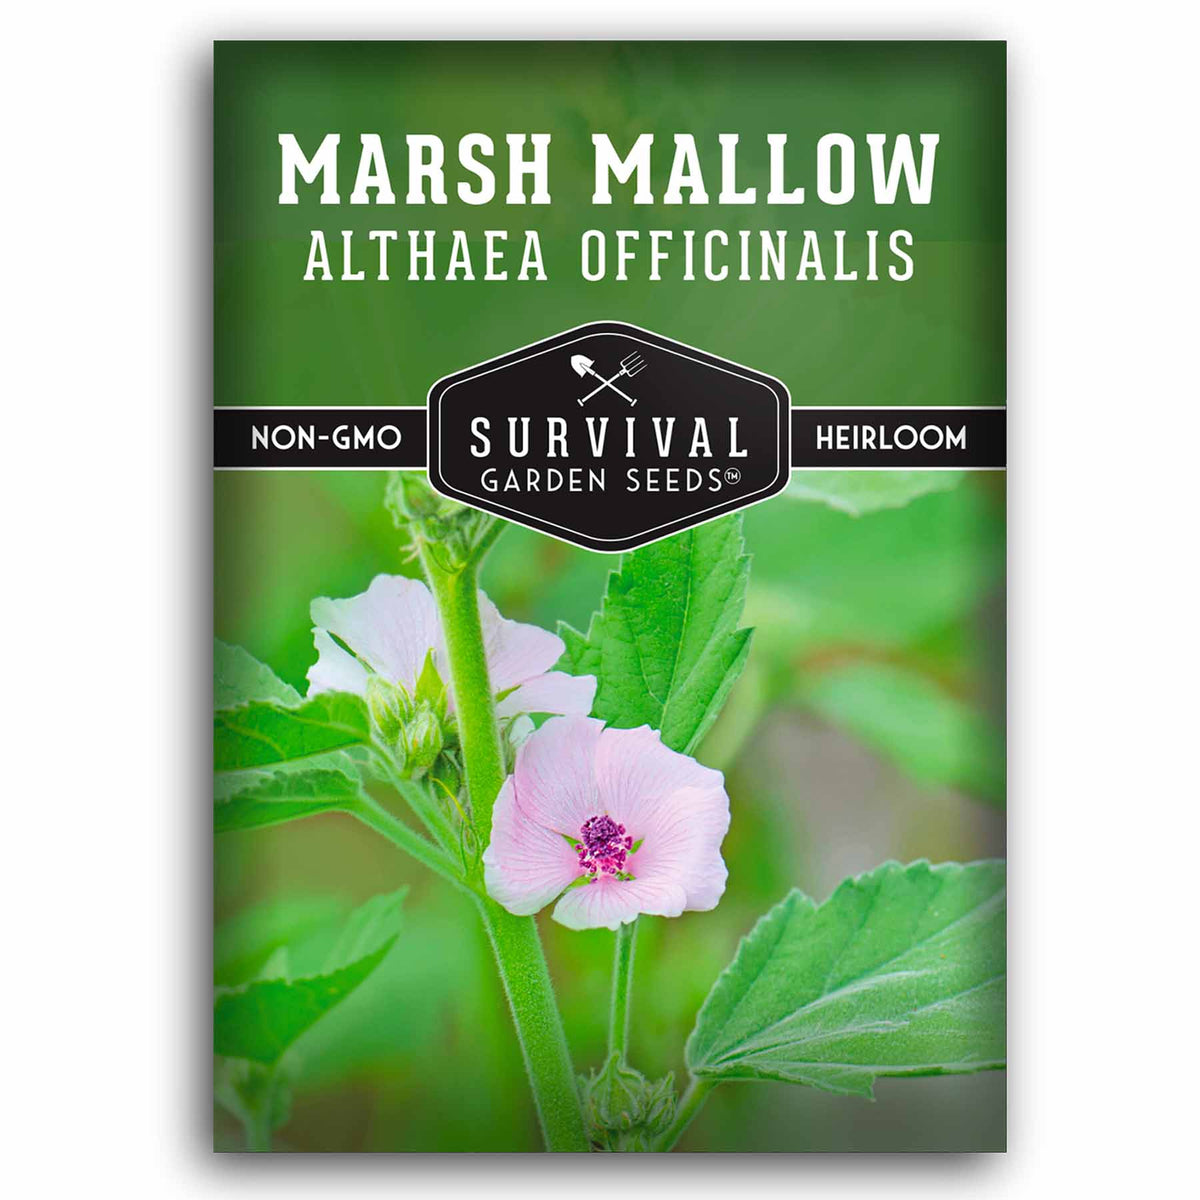 1 packet of Marsh Mallow seeds